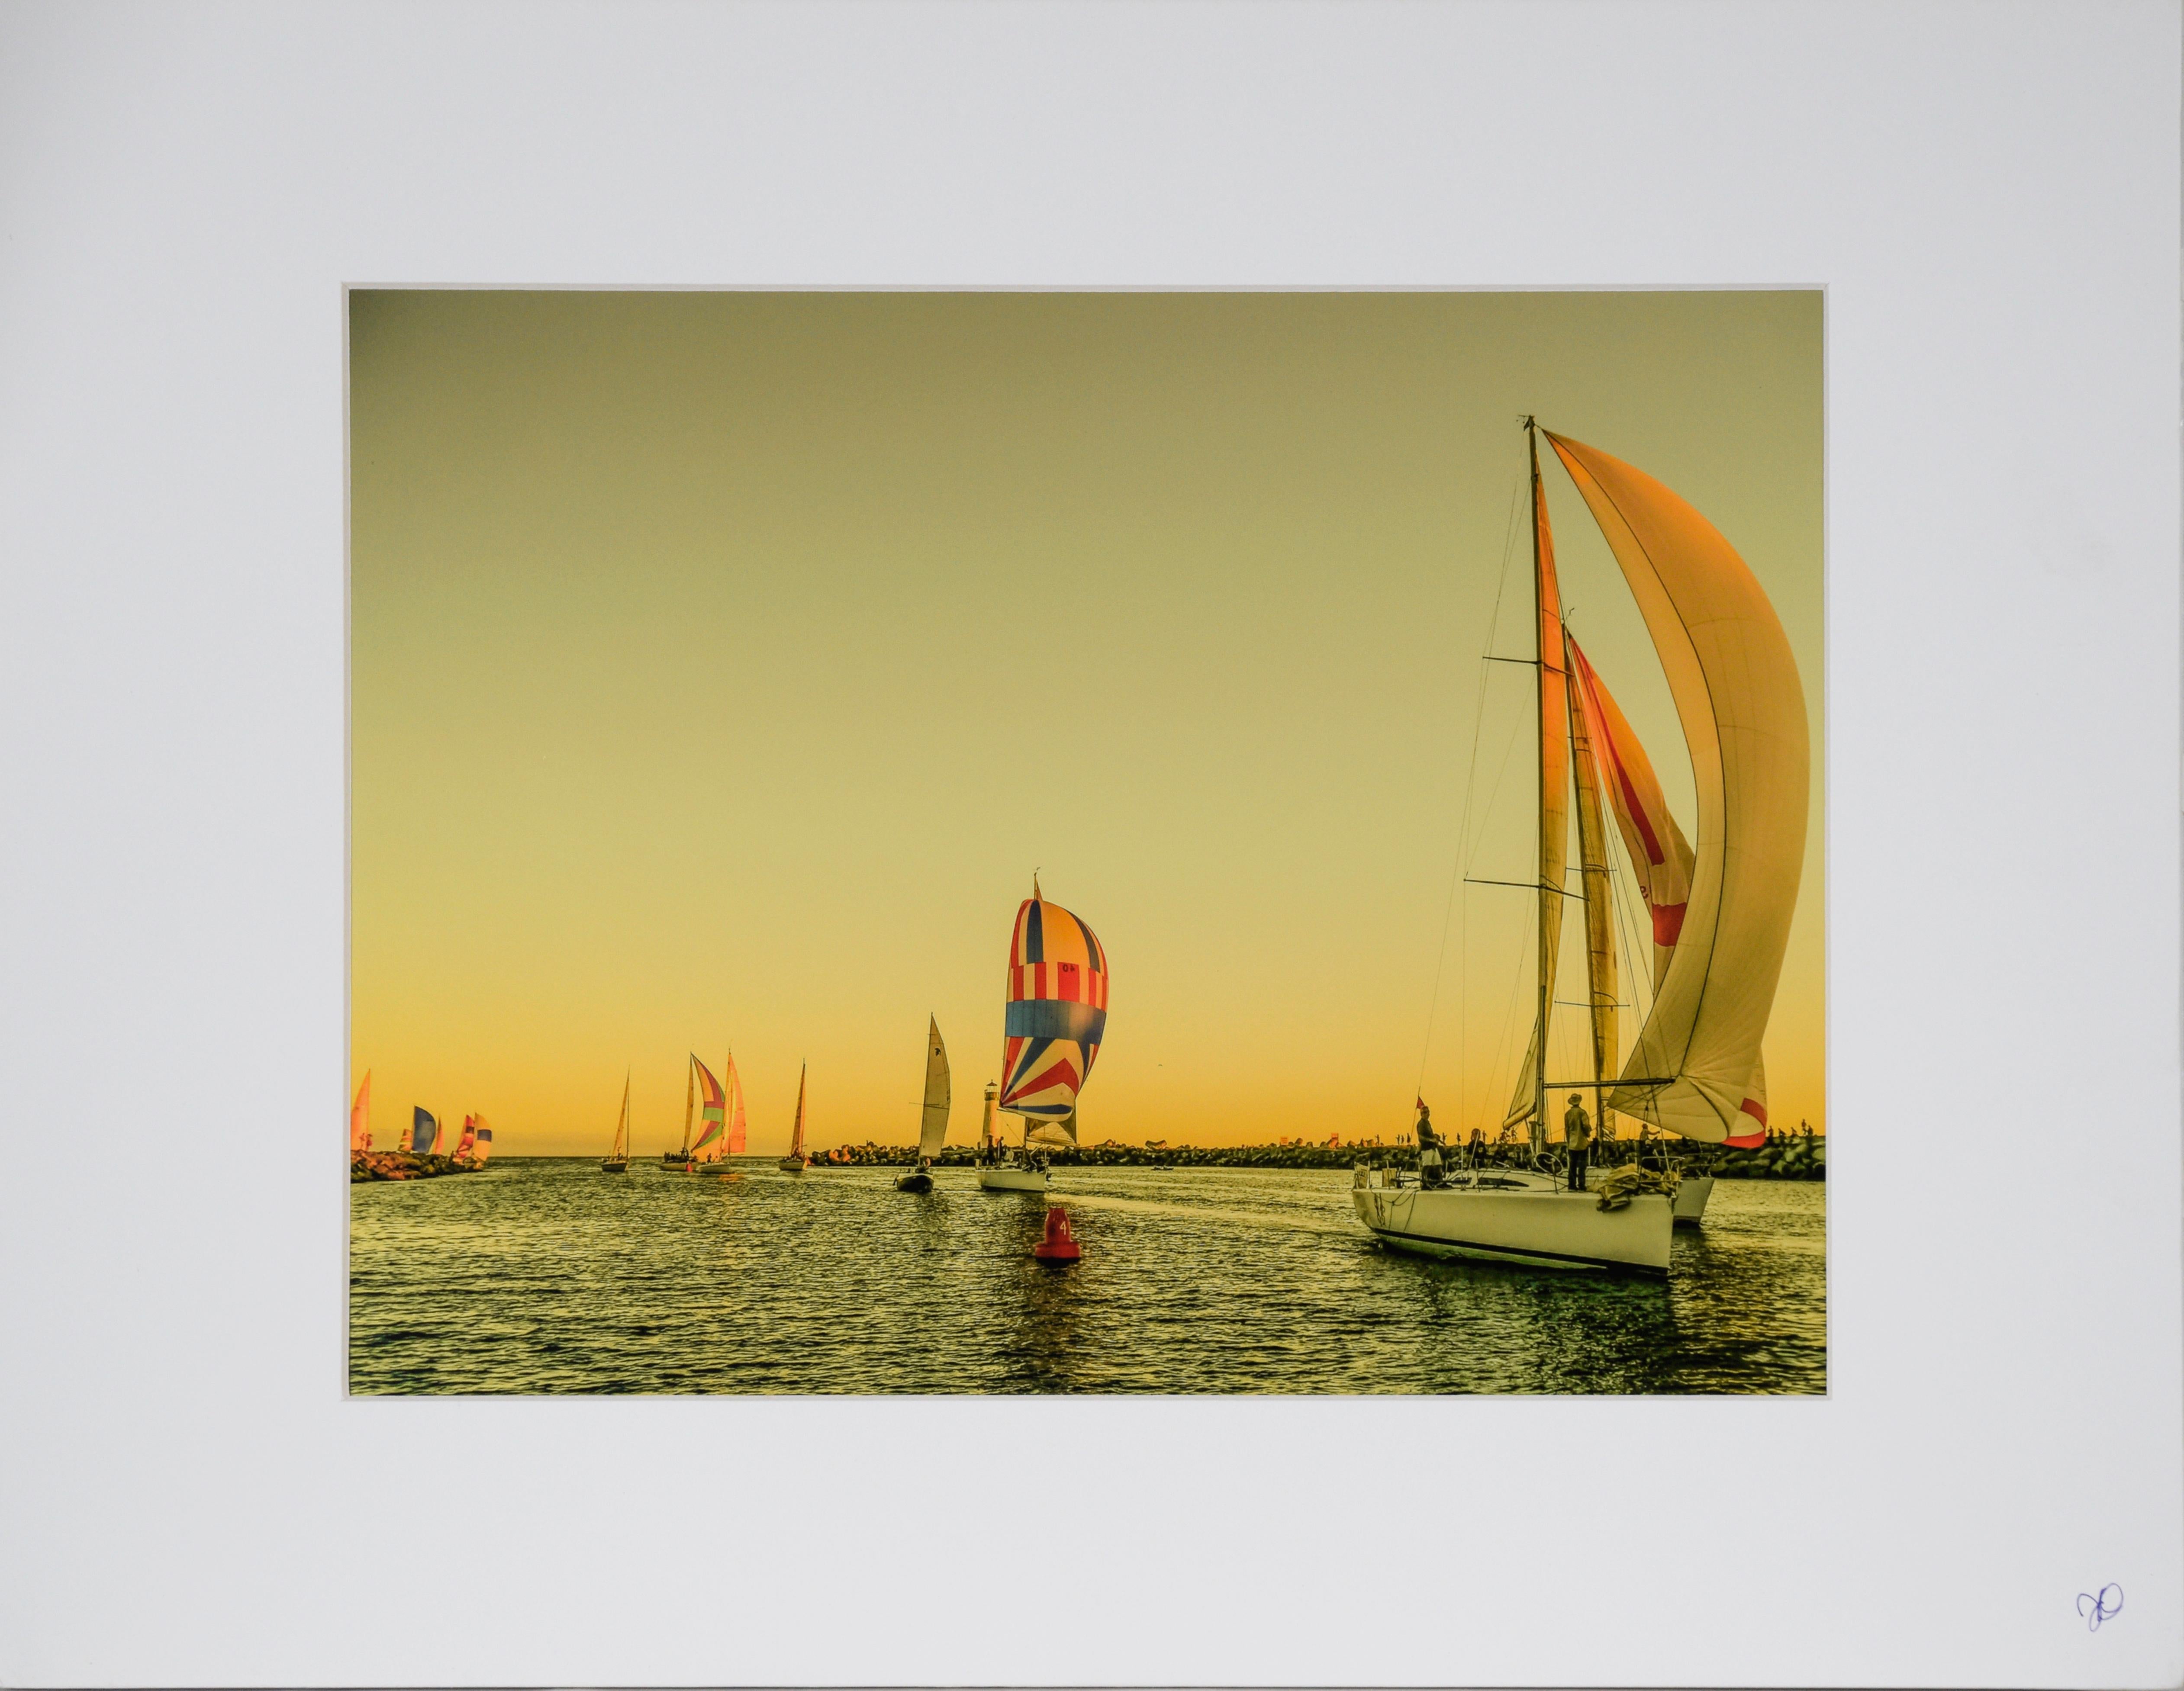 Boats Sailing At Sunset, Santa Cruz - Color Photograph

Color photograph of sailboats at sunset in front of the Breakwater Lighthouse in Santa Cruz, California by John F. Hunter (American). The viewer looks out towards the ocean as multiple colorful